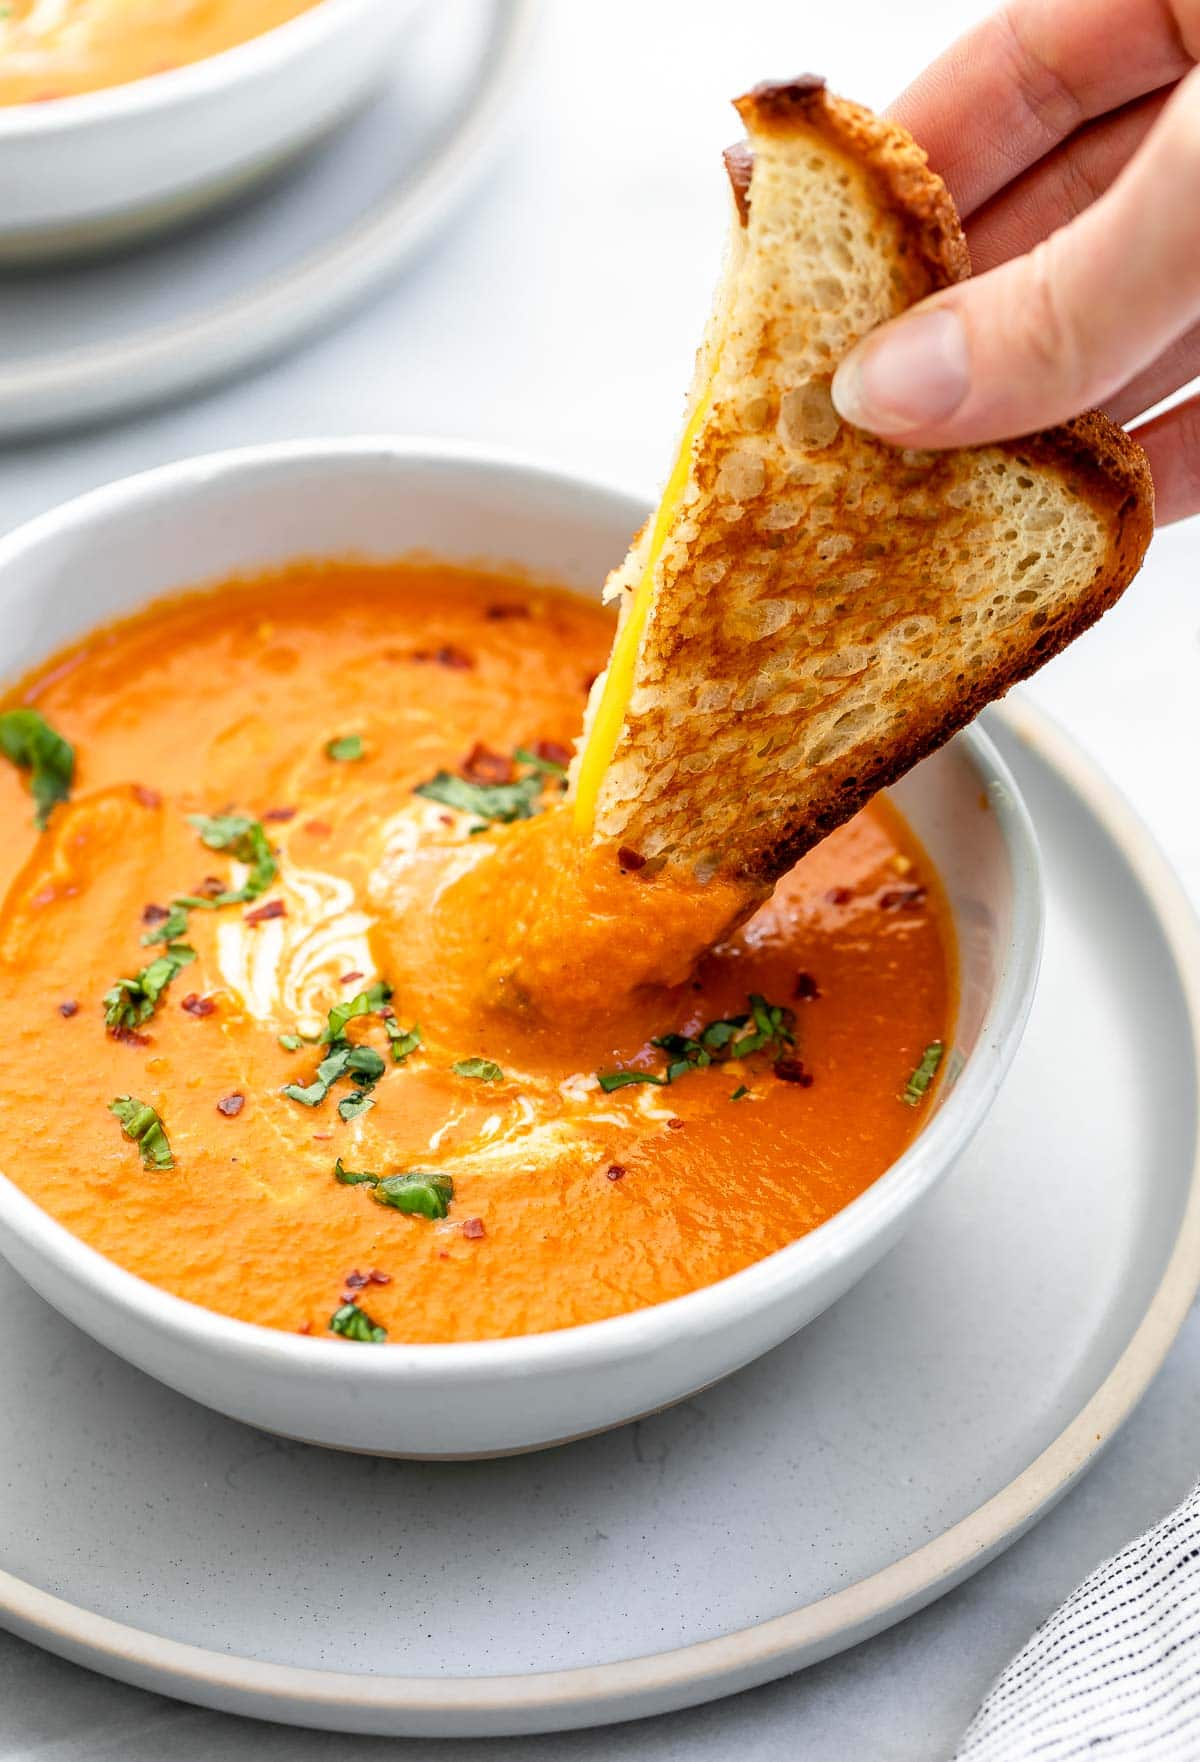 Dipping a grilled cheese into a bowl of the tomato soup.